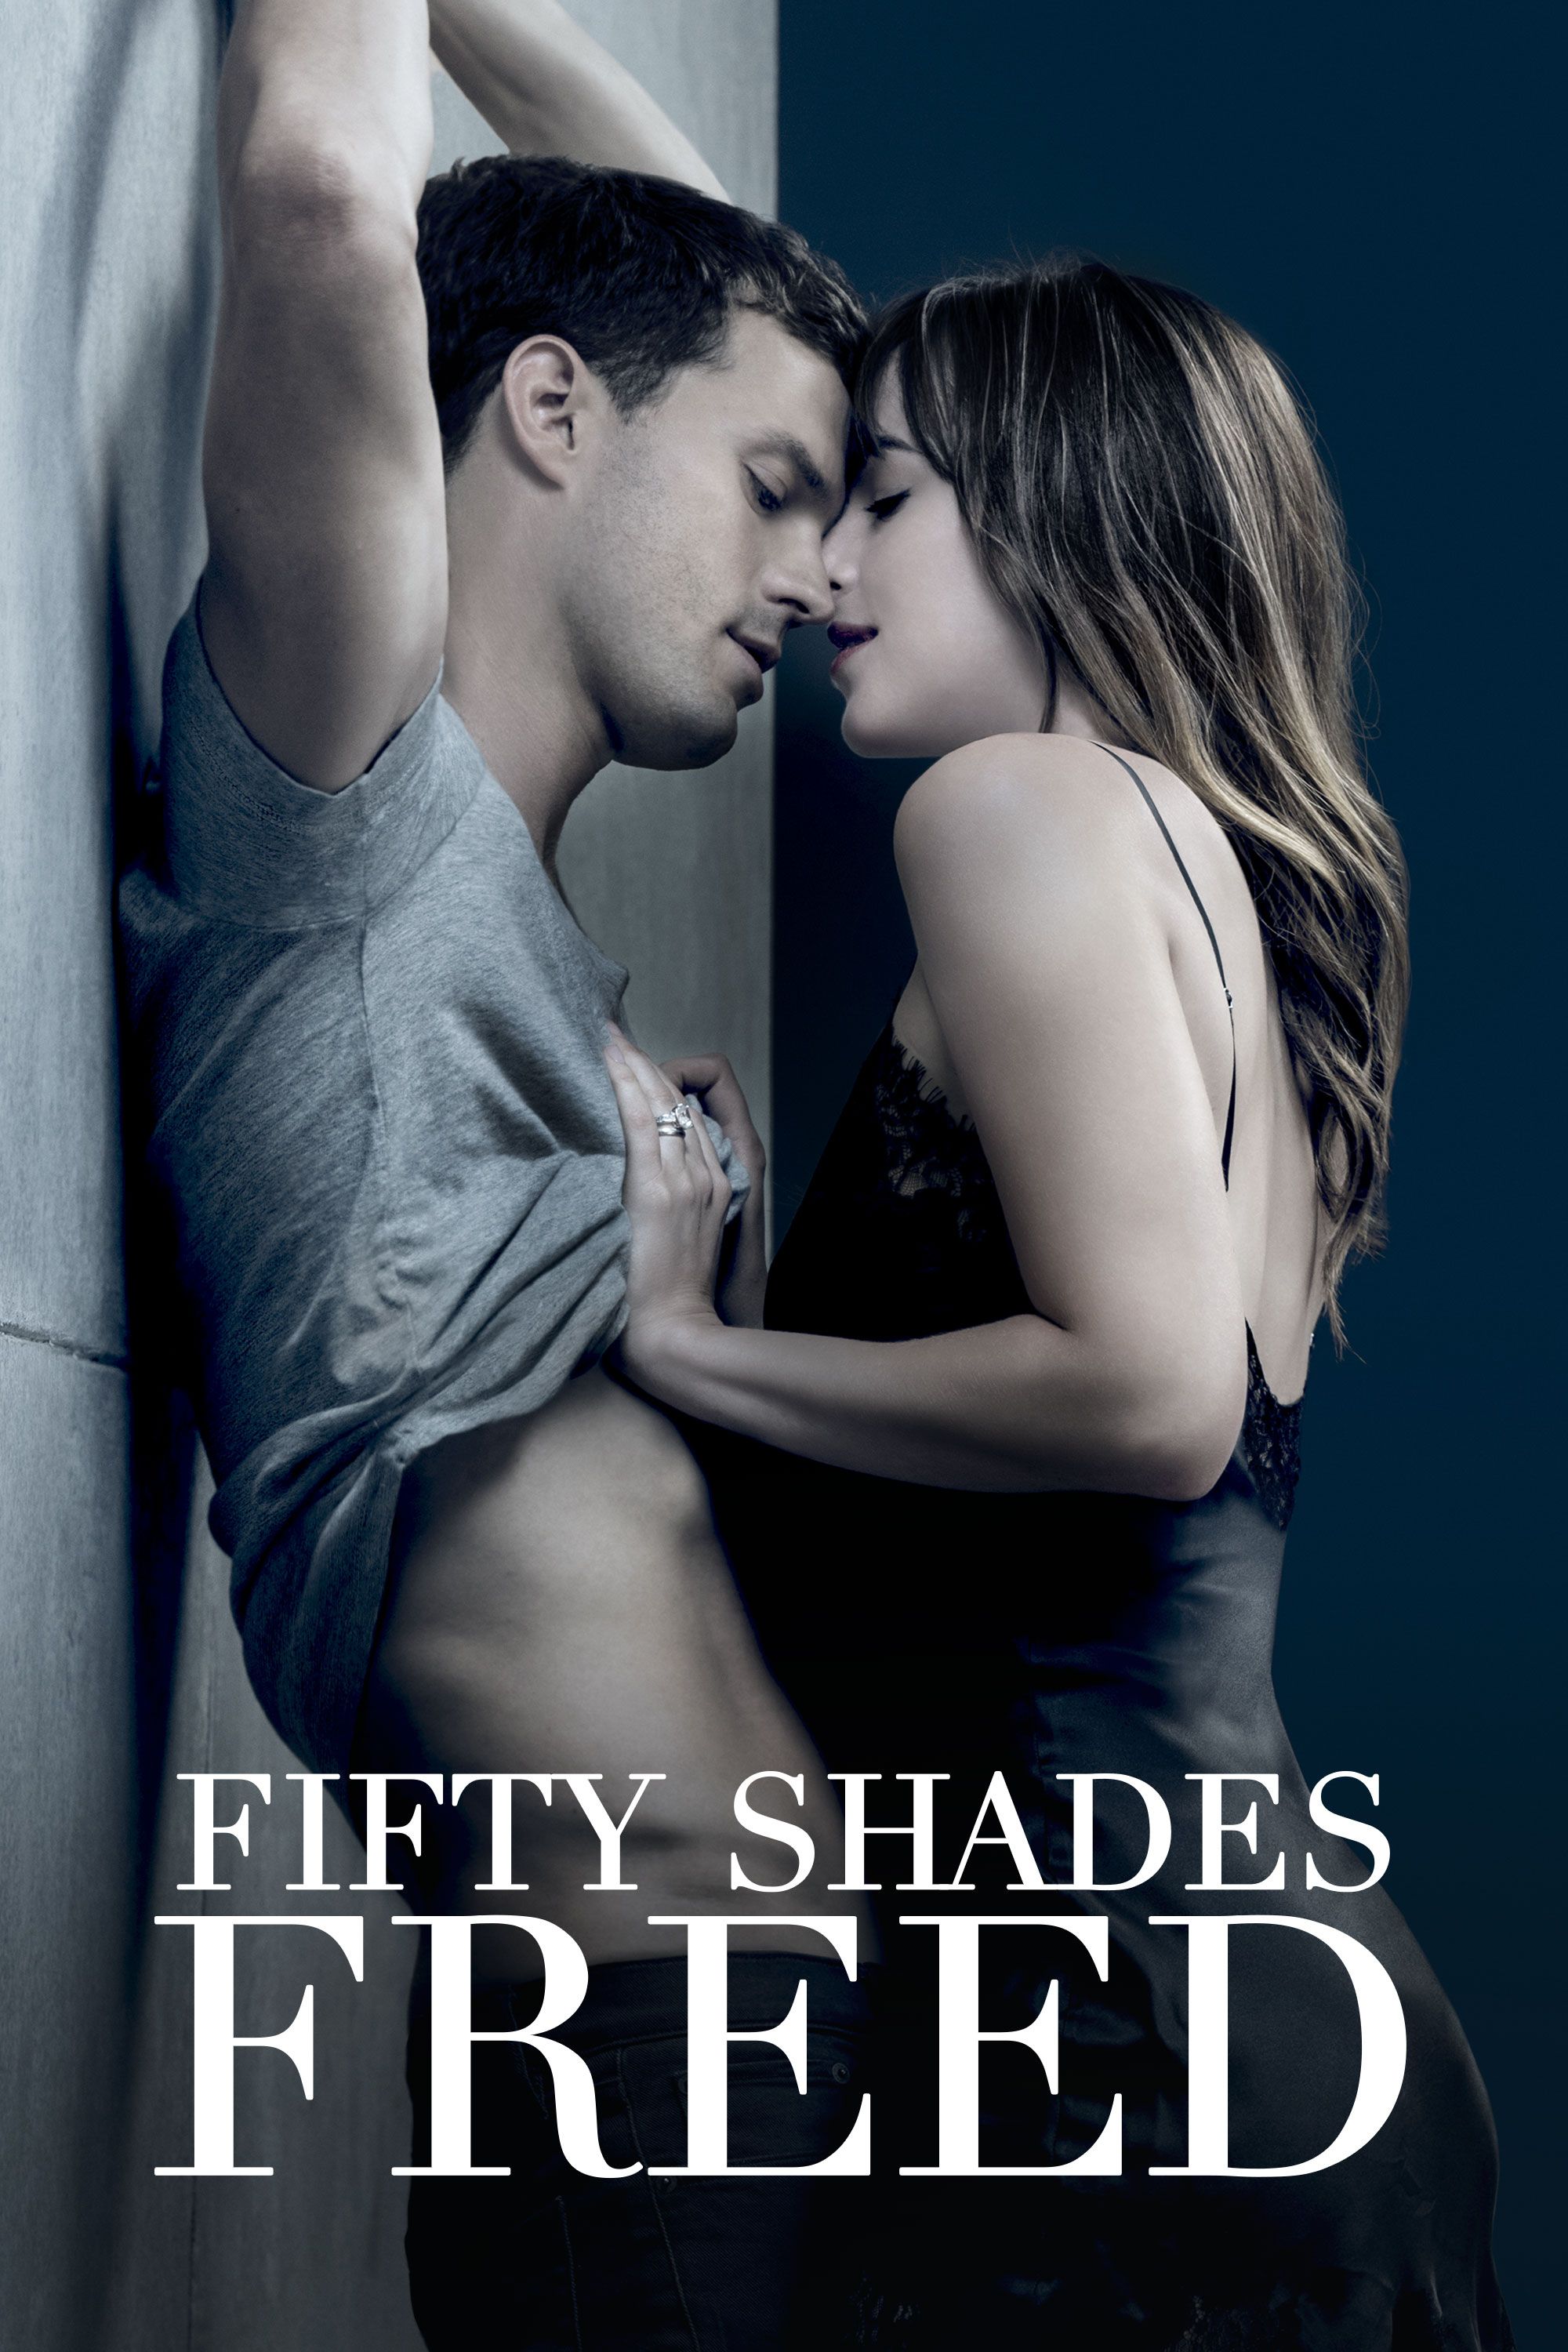 Fifty shades of freed full movie